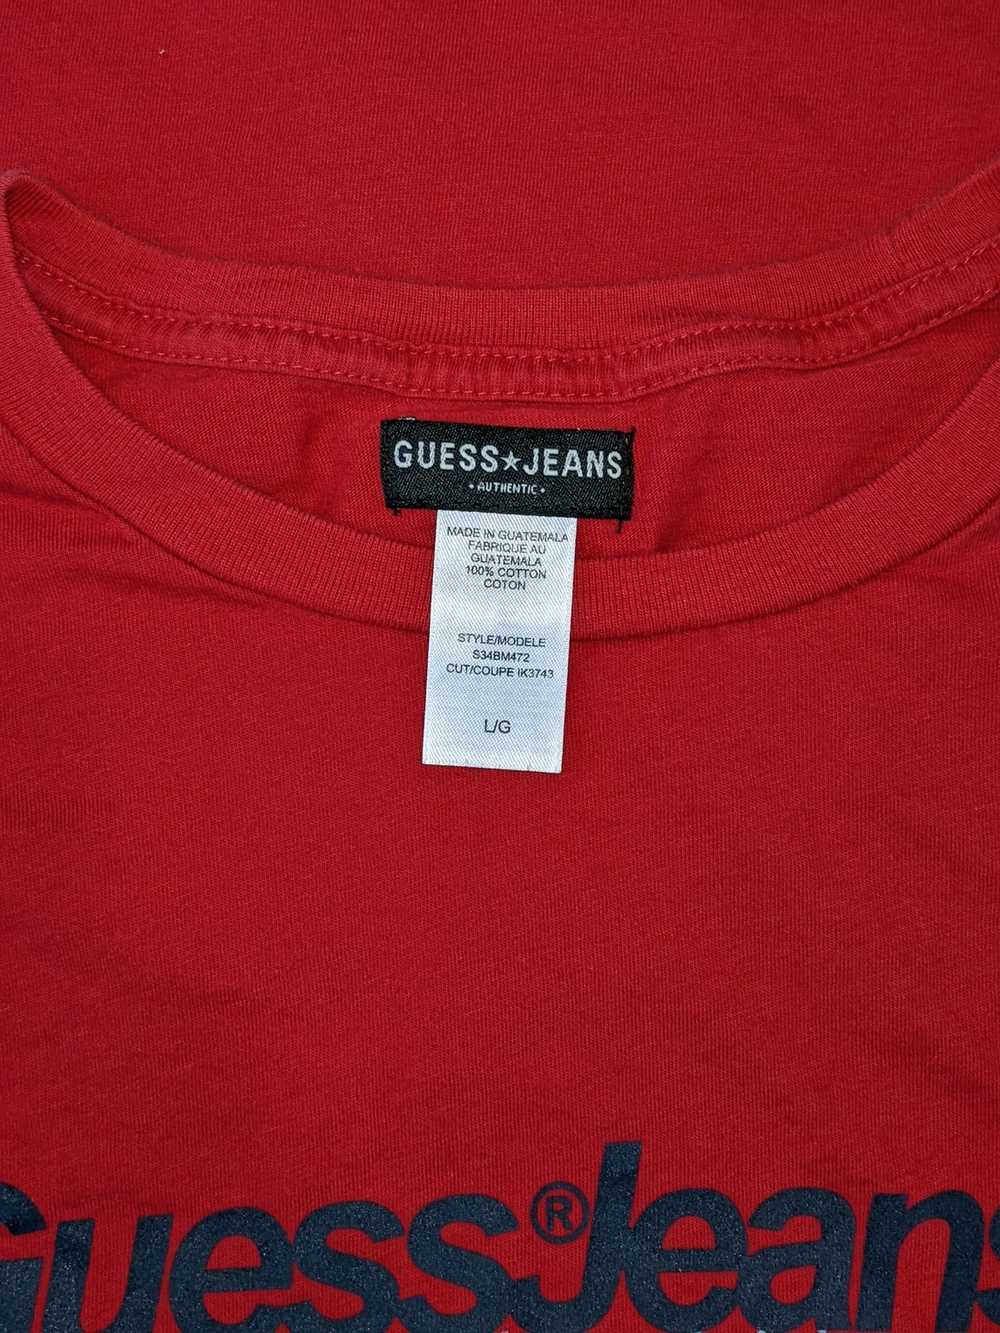 Guess Guess Jeans Co. red t-shirt - image 3